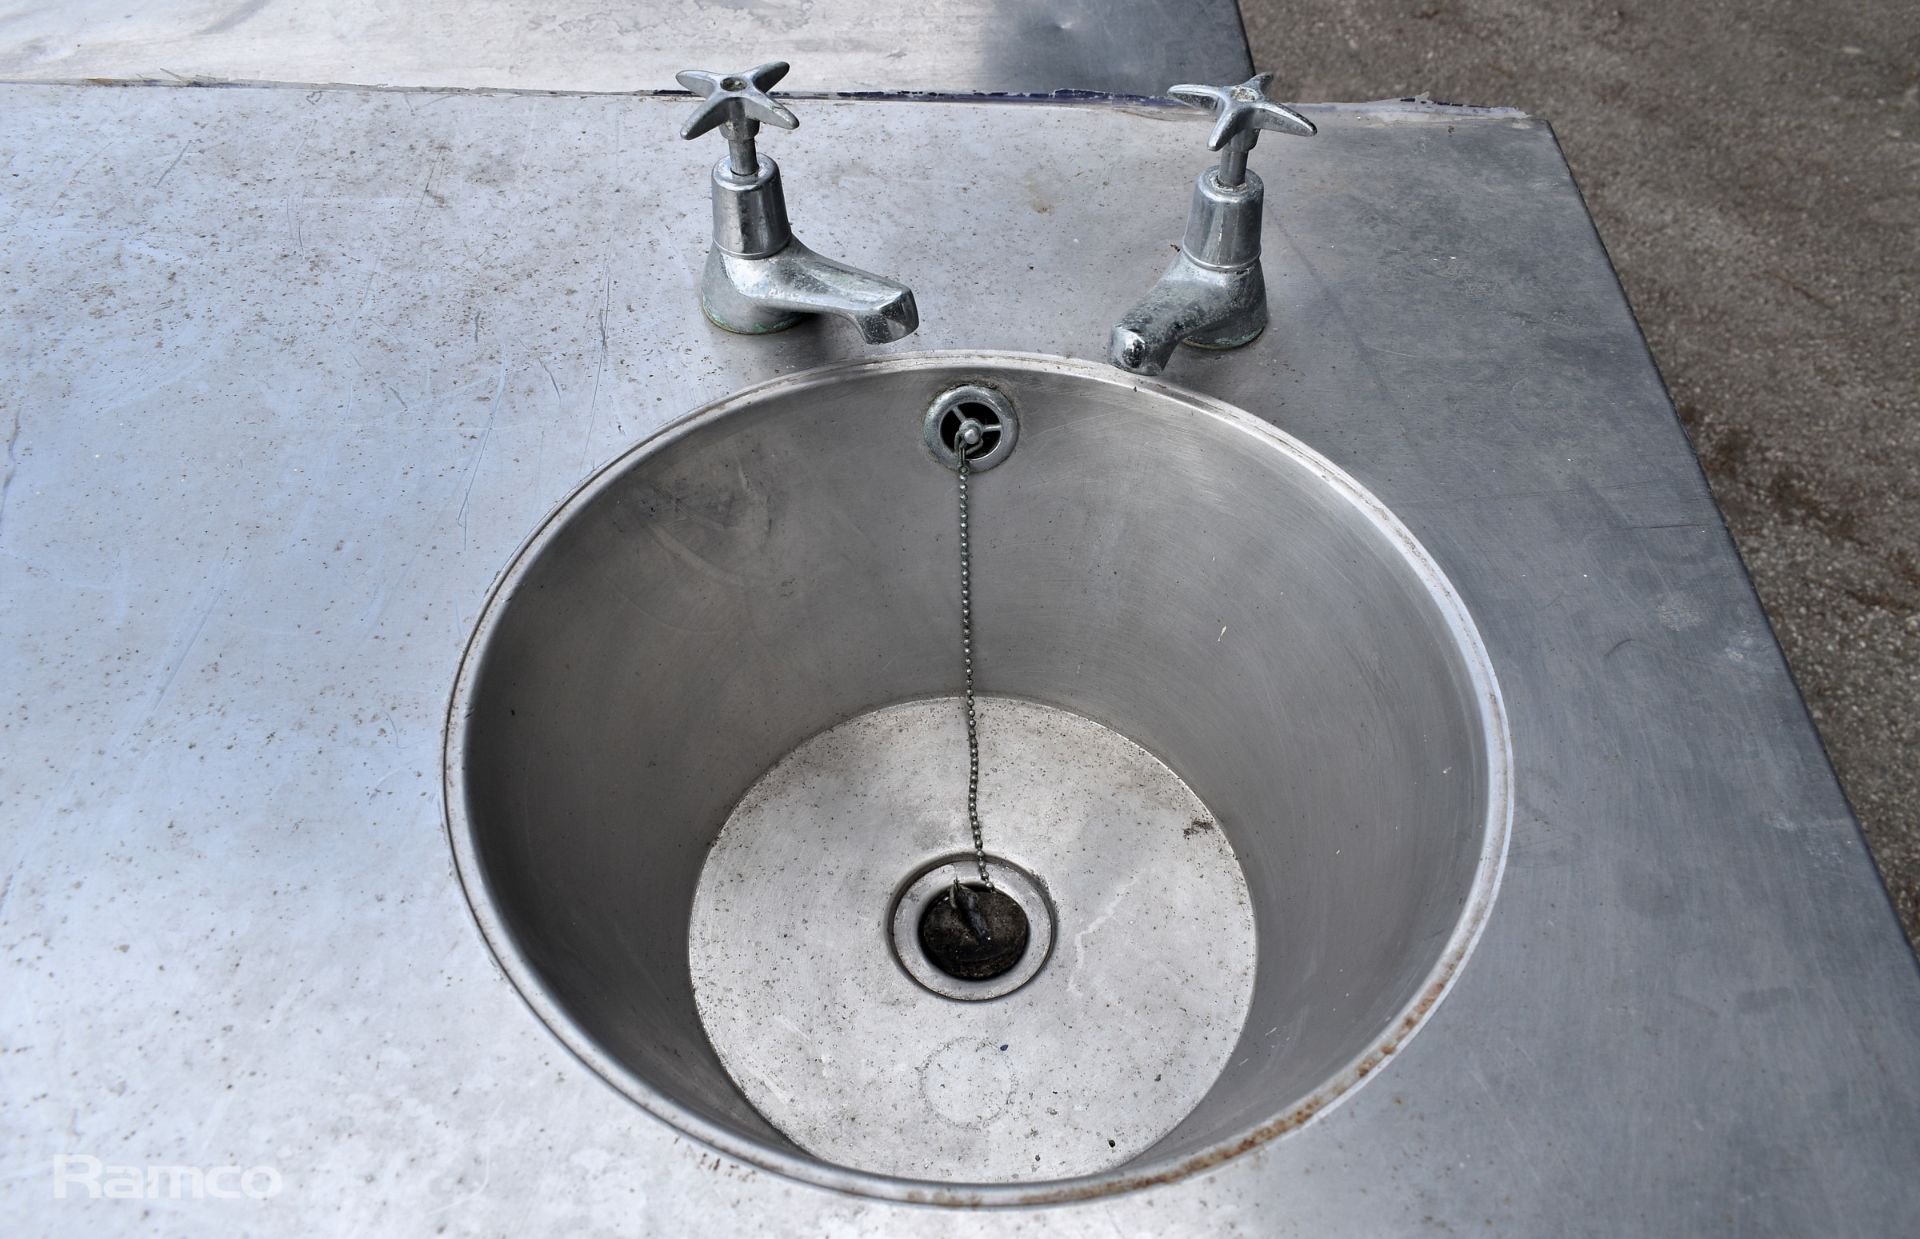 Stainless steel table with handwash sink - W 1750 x D 660 x H 900mm - Image 3 of 4